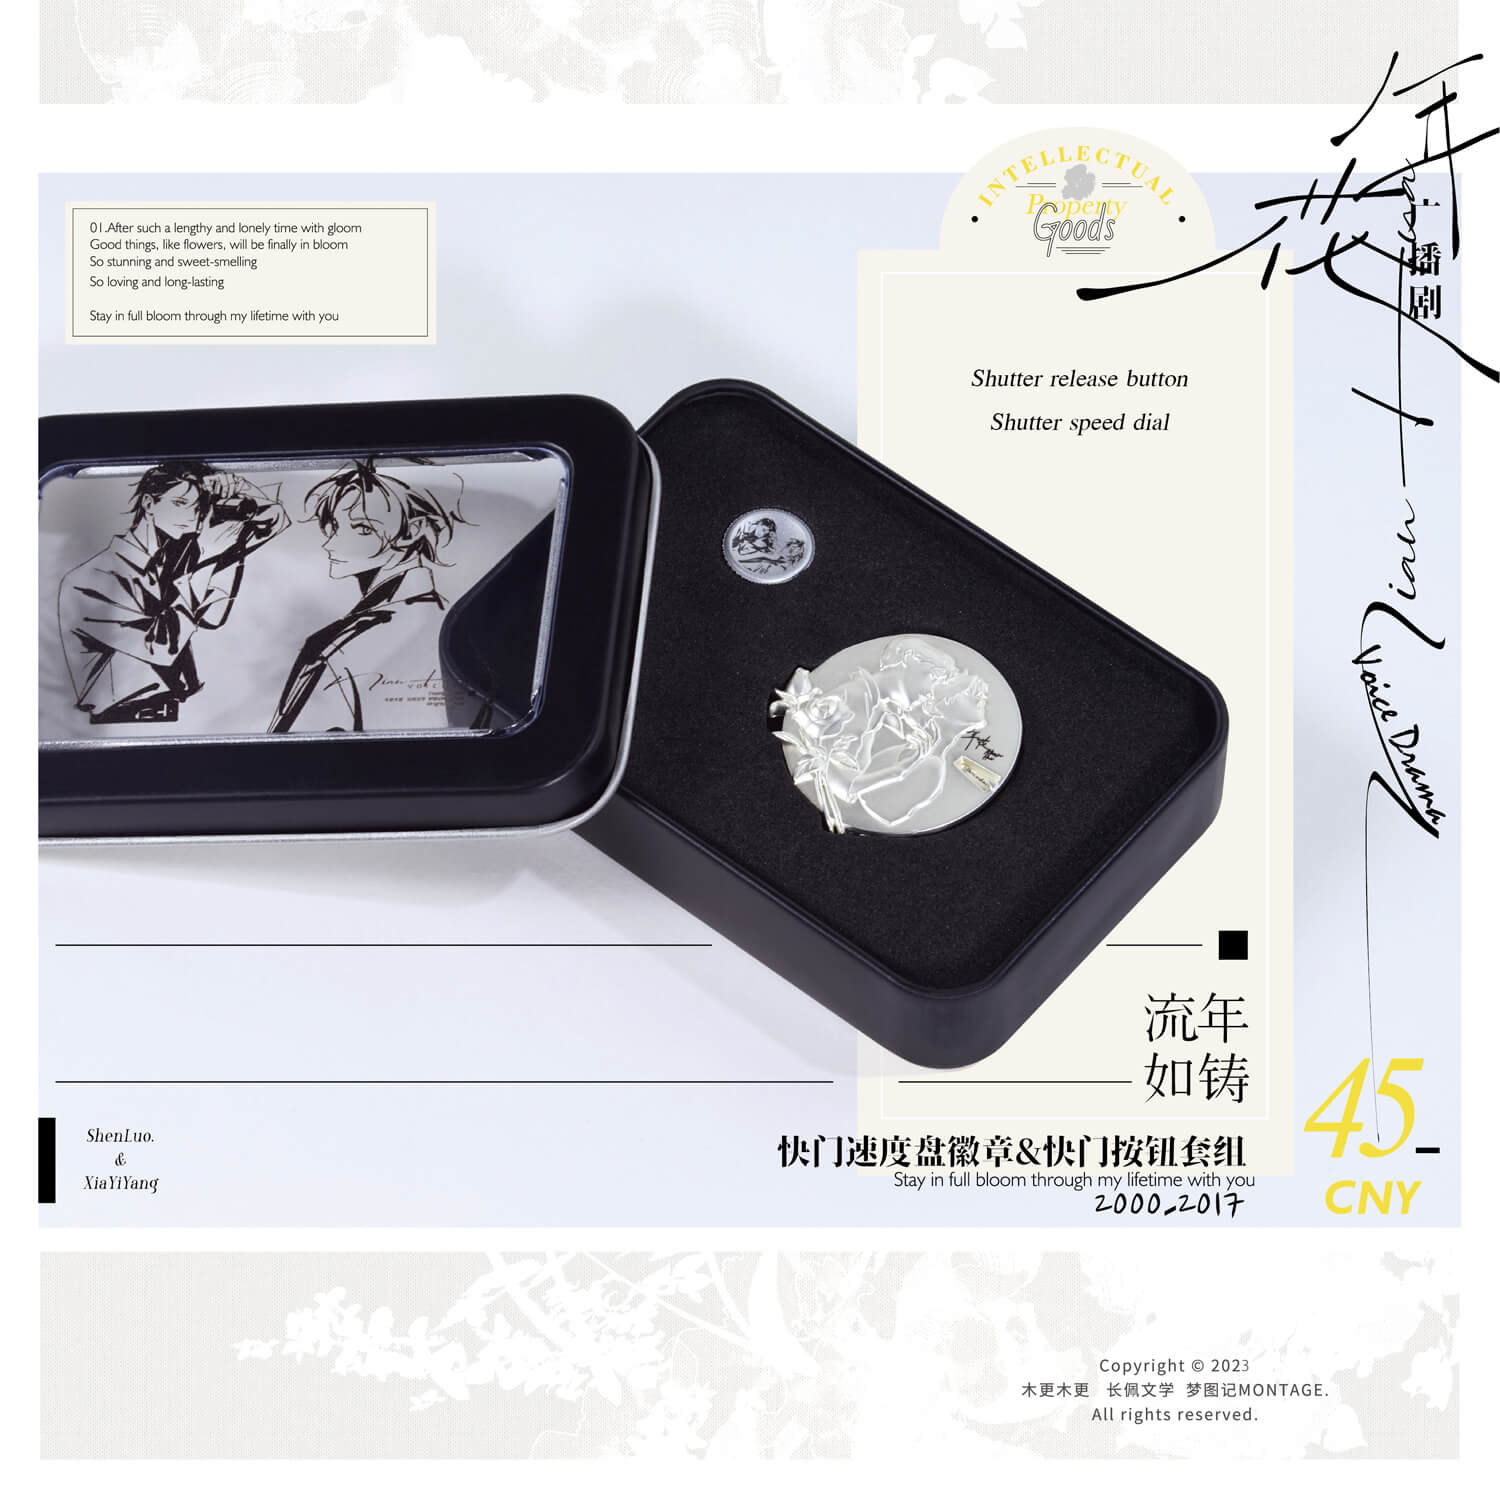 【2pcs 5% off】Nianhua Montage Postcard Standee Badge